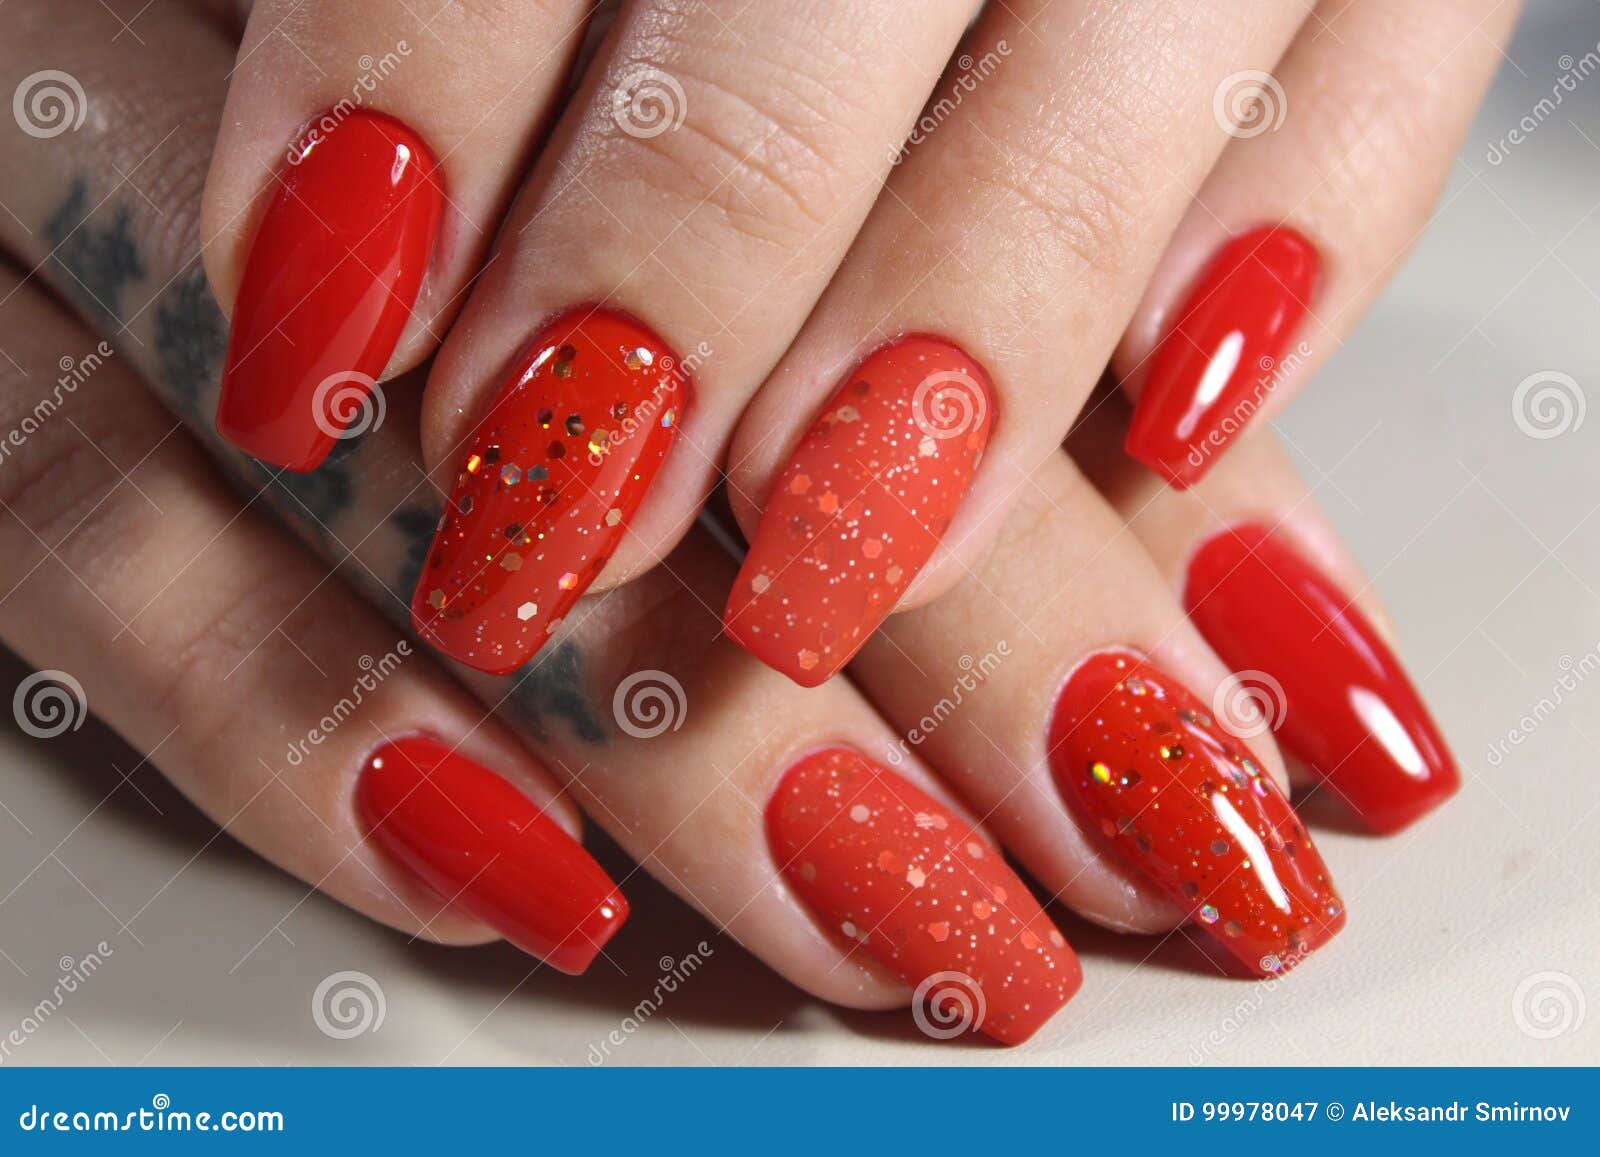 100+ Beautiful, Sexy Red Nail Designs, More Confident